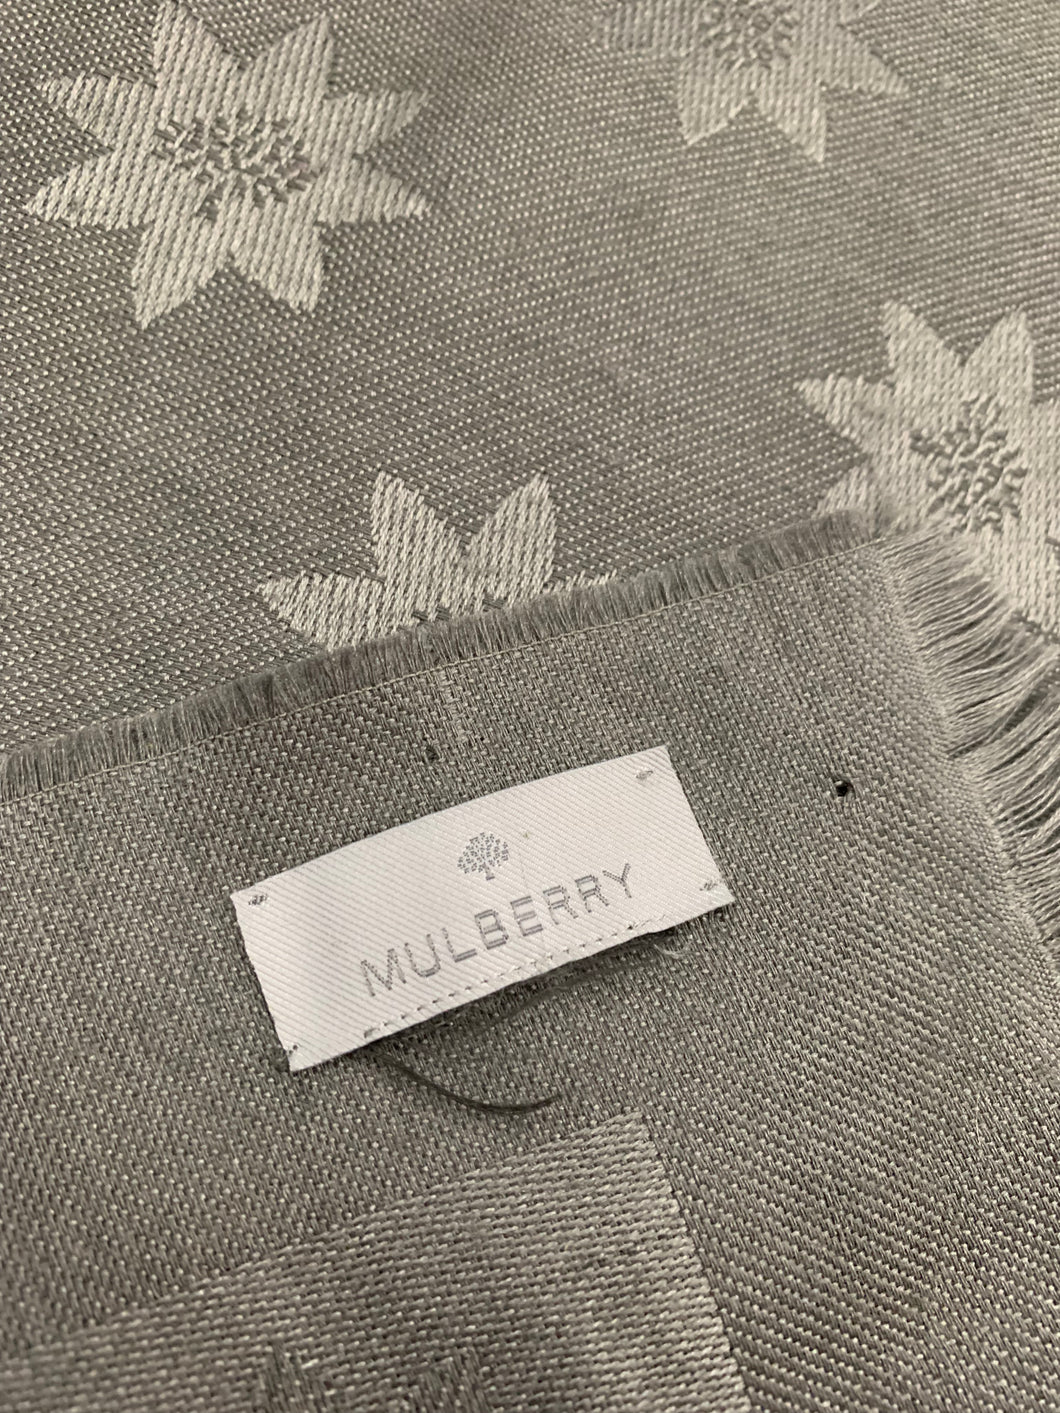 MULBERRY SCARF - Grey - Mulberry Branded Pattern